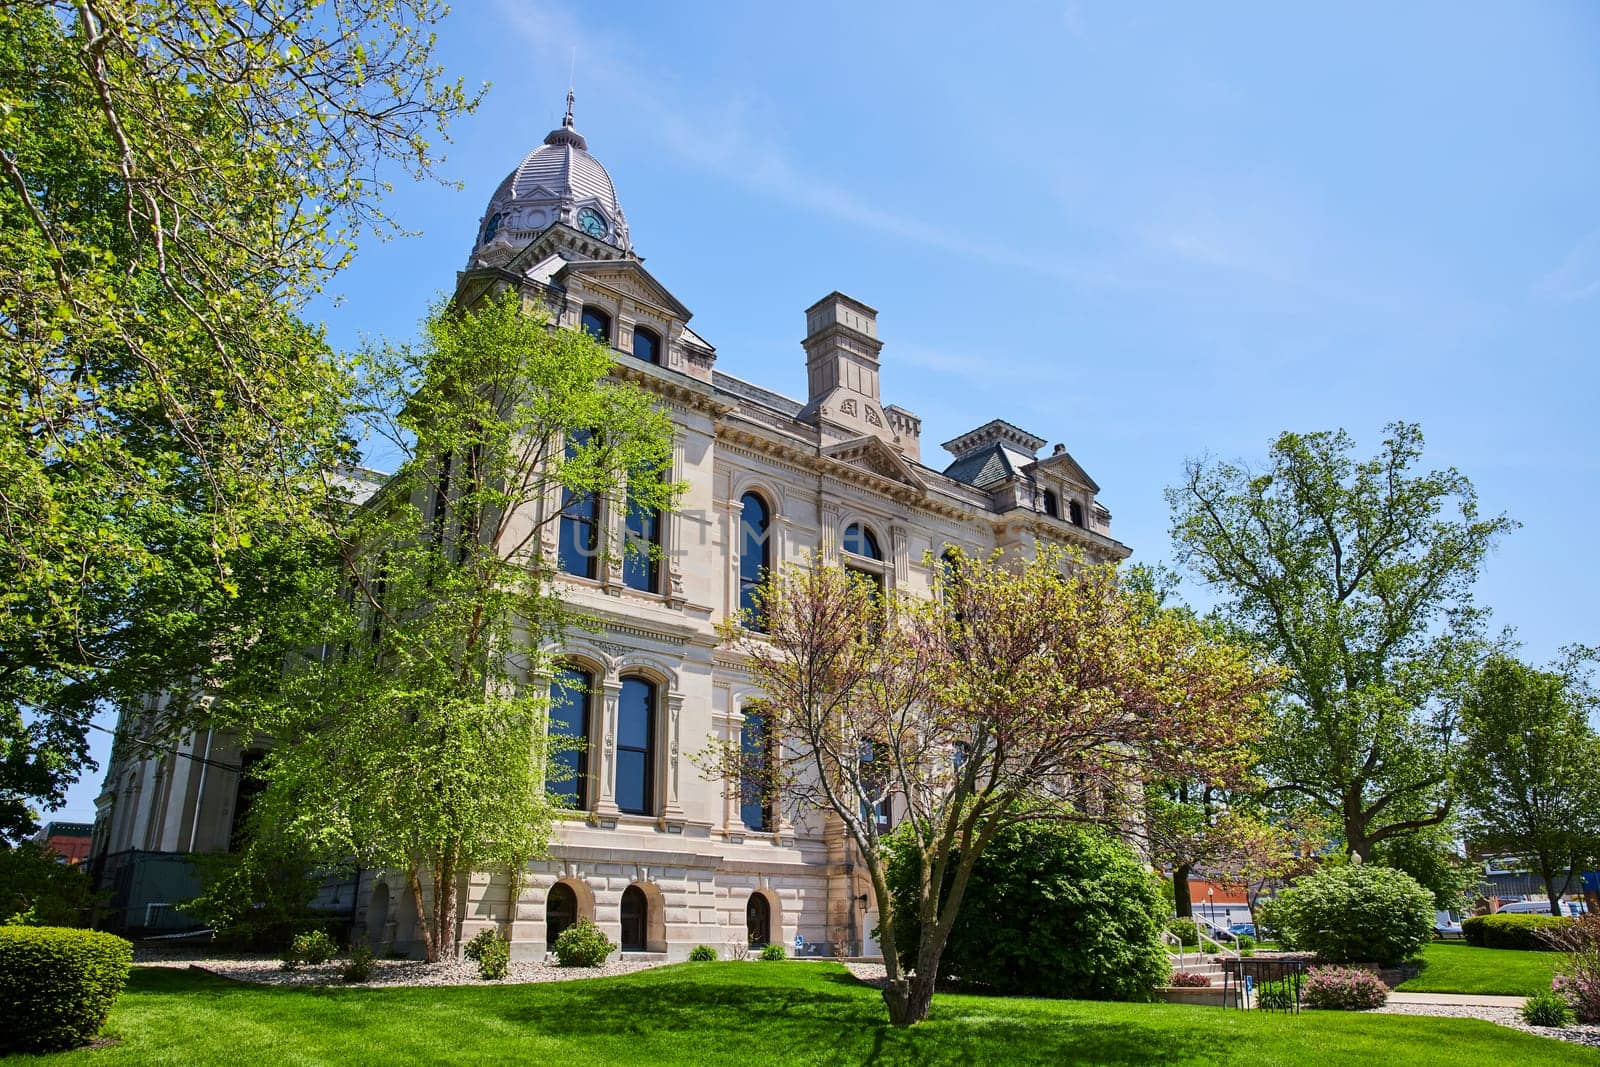 Historic Kosciusko County Courthouse in Warsaw, Indiana, framed by lush greenery under a clear blue sky.